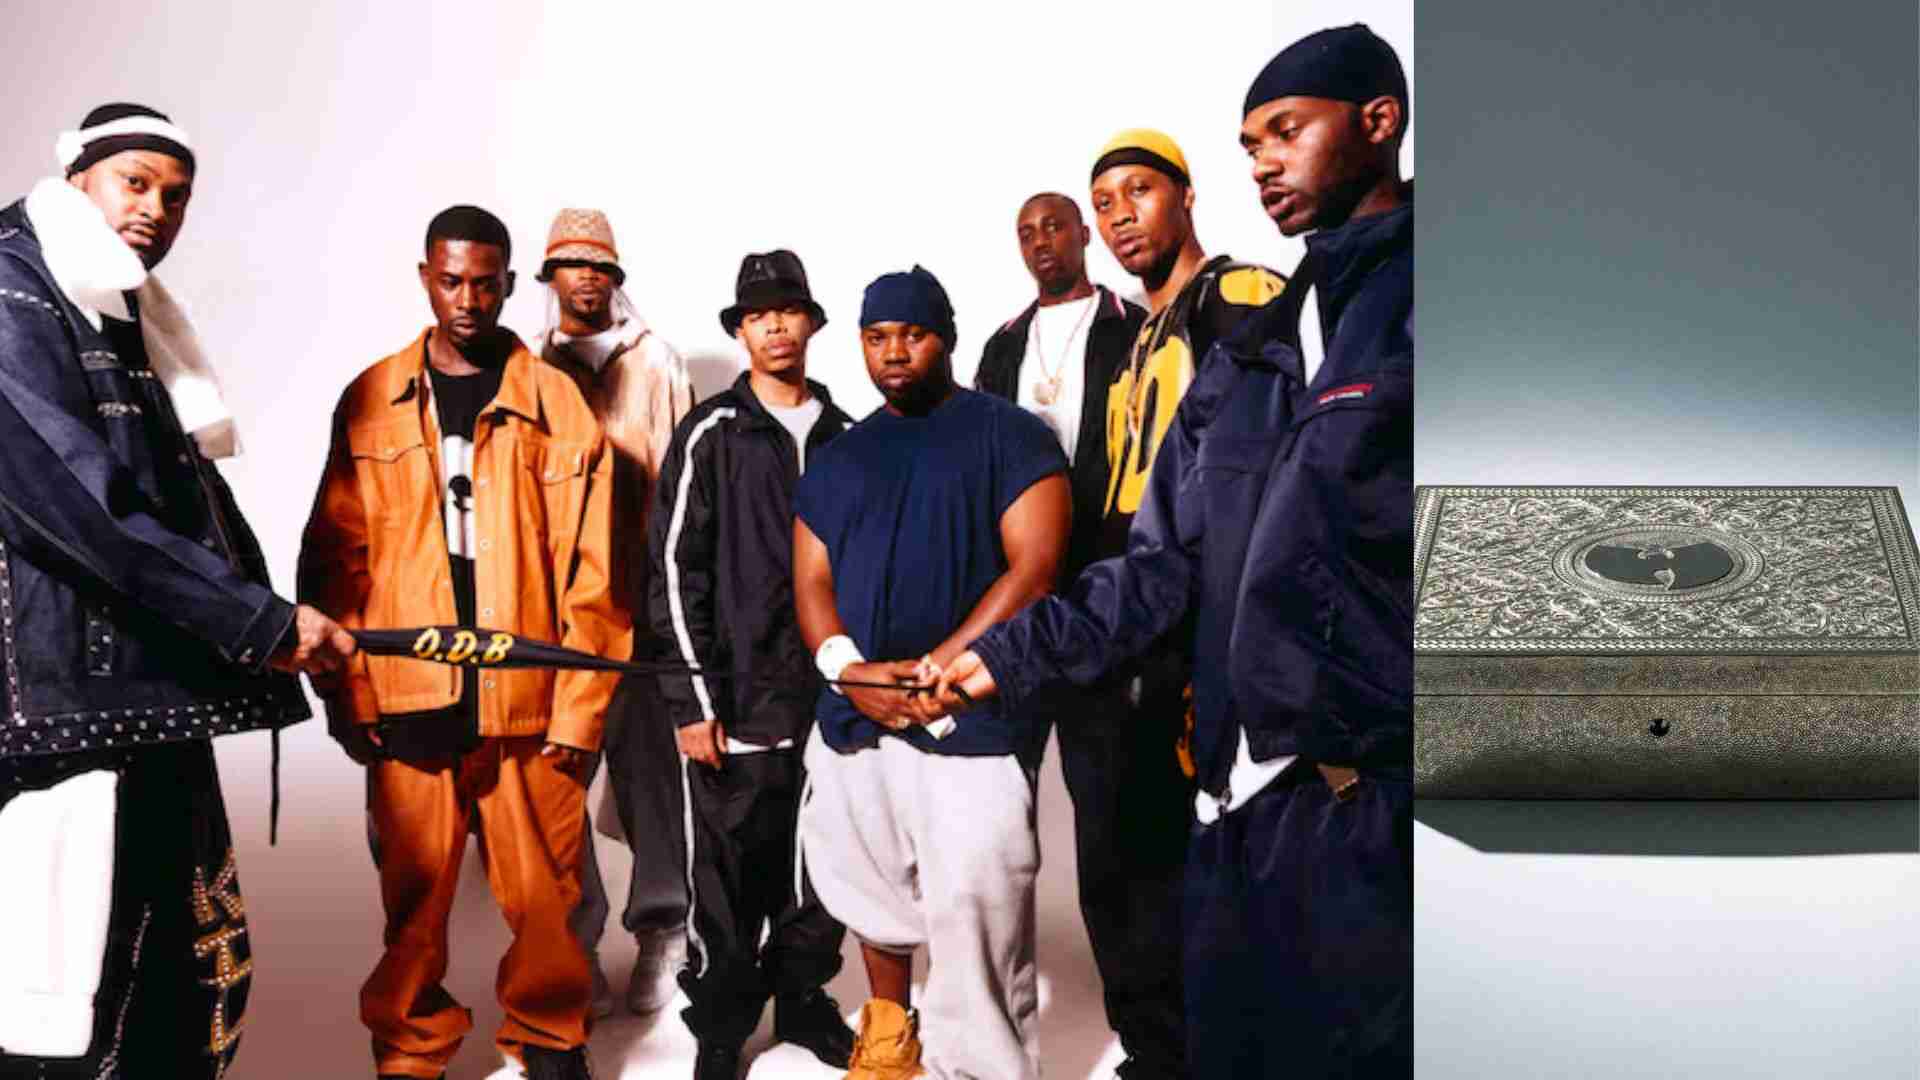 Australia Museum To Play Sole Copy Of Wu-Tang Clan's Album In Public Premiere